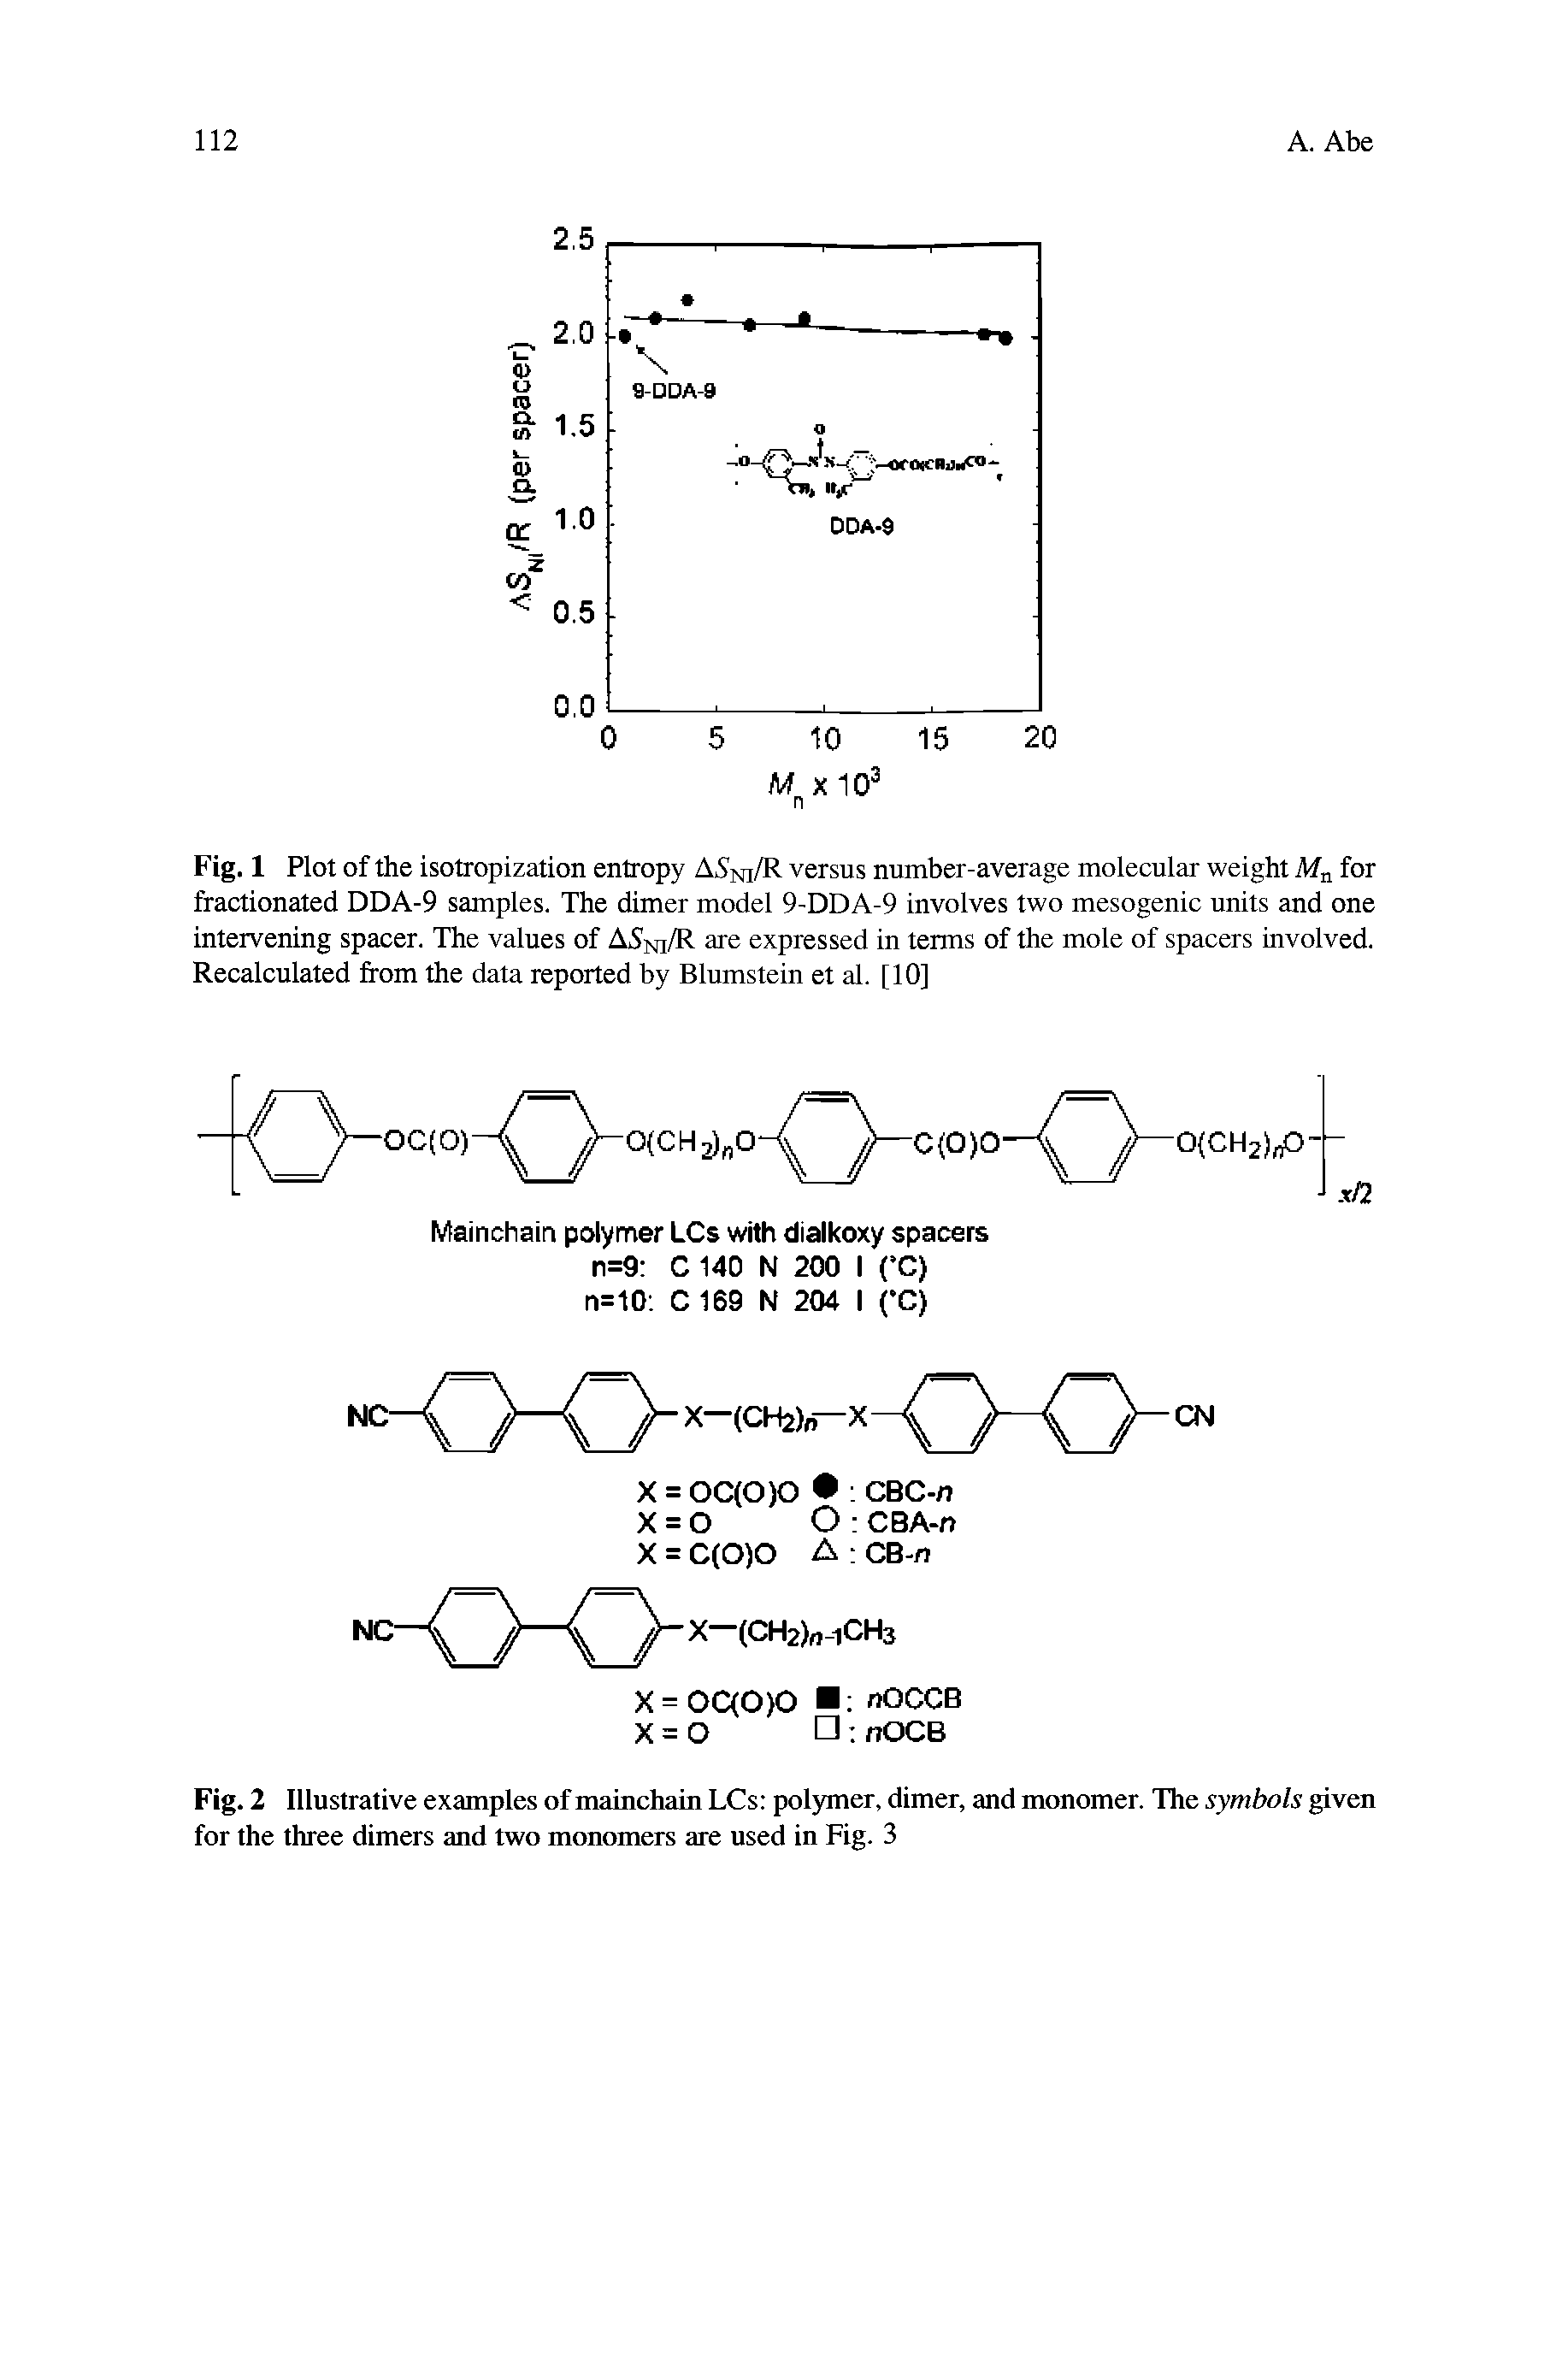 Fig. 2 Illustrative examples of mainchain LCs polymer, dimer, and monomer. The symbols given for the three dimers and two monomers are used in Fig- 3...